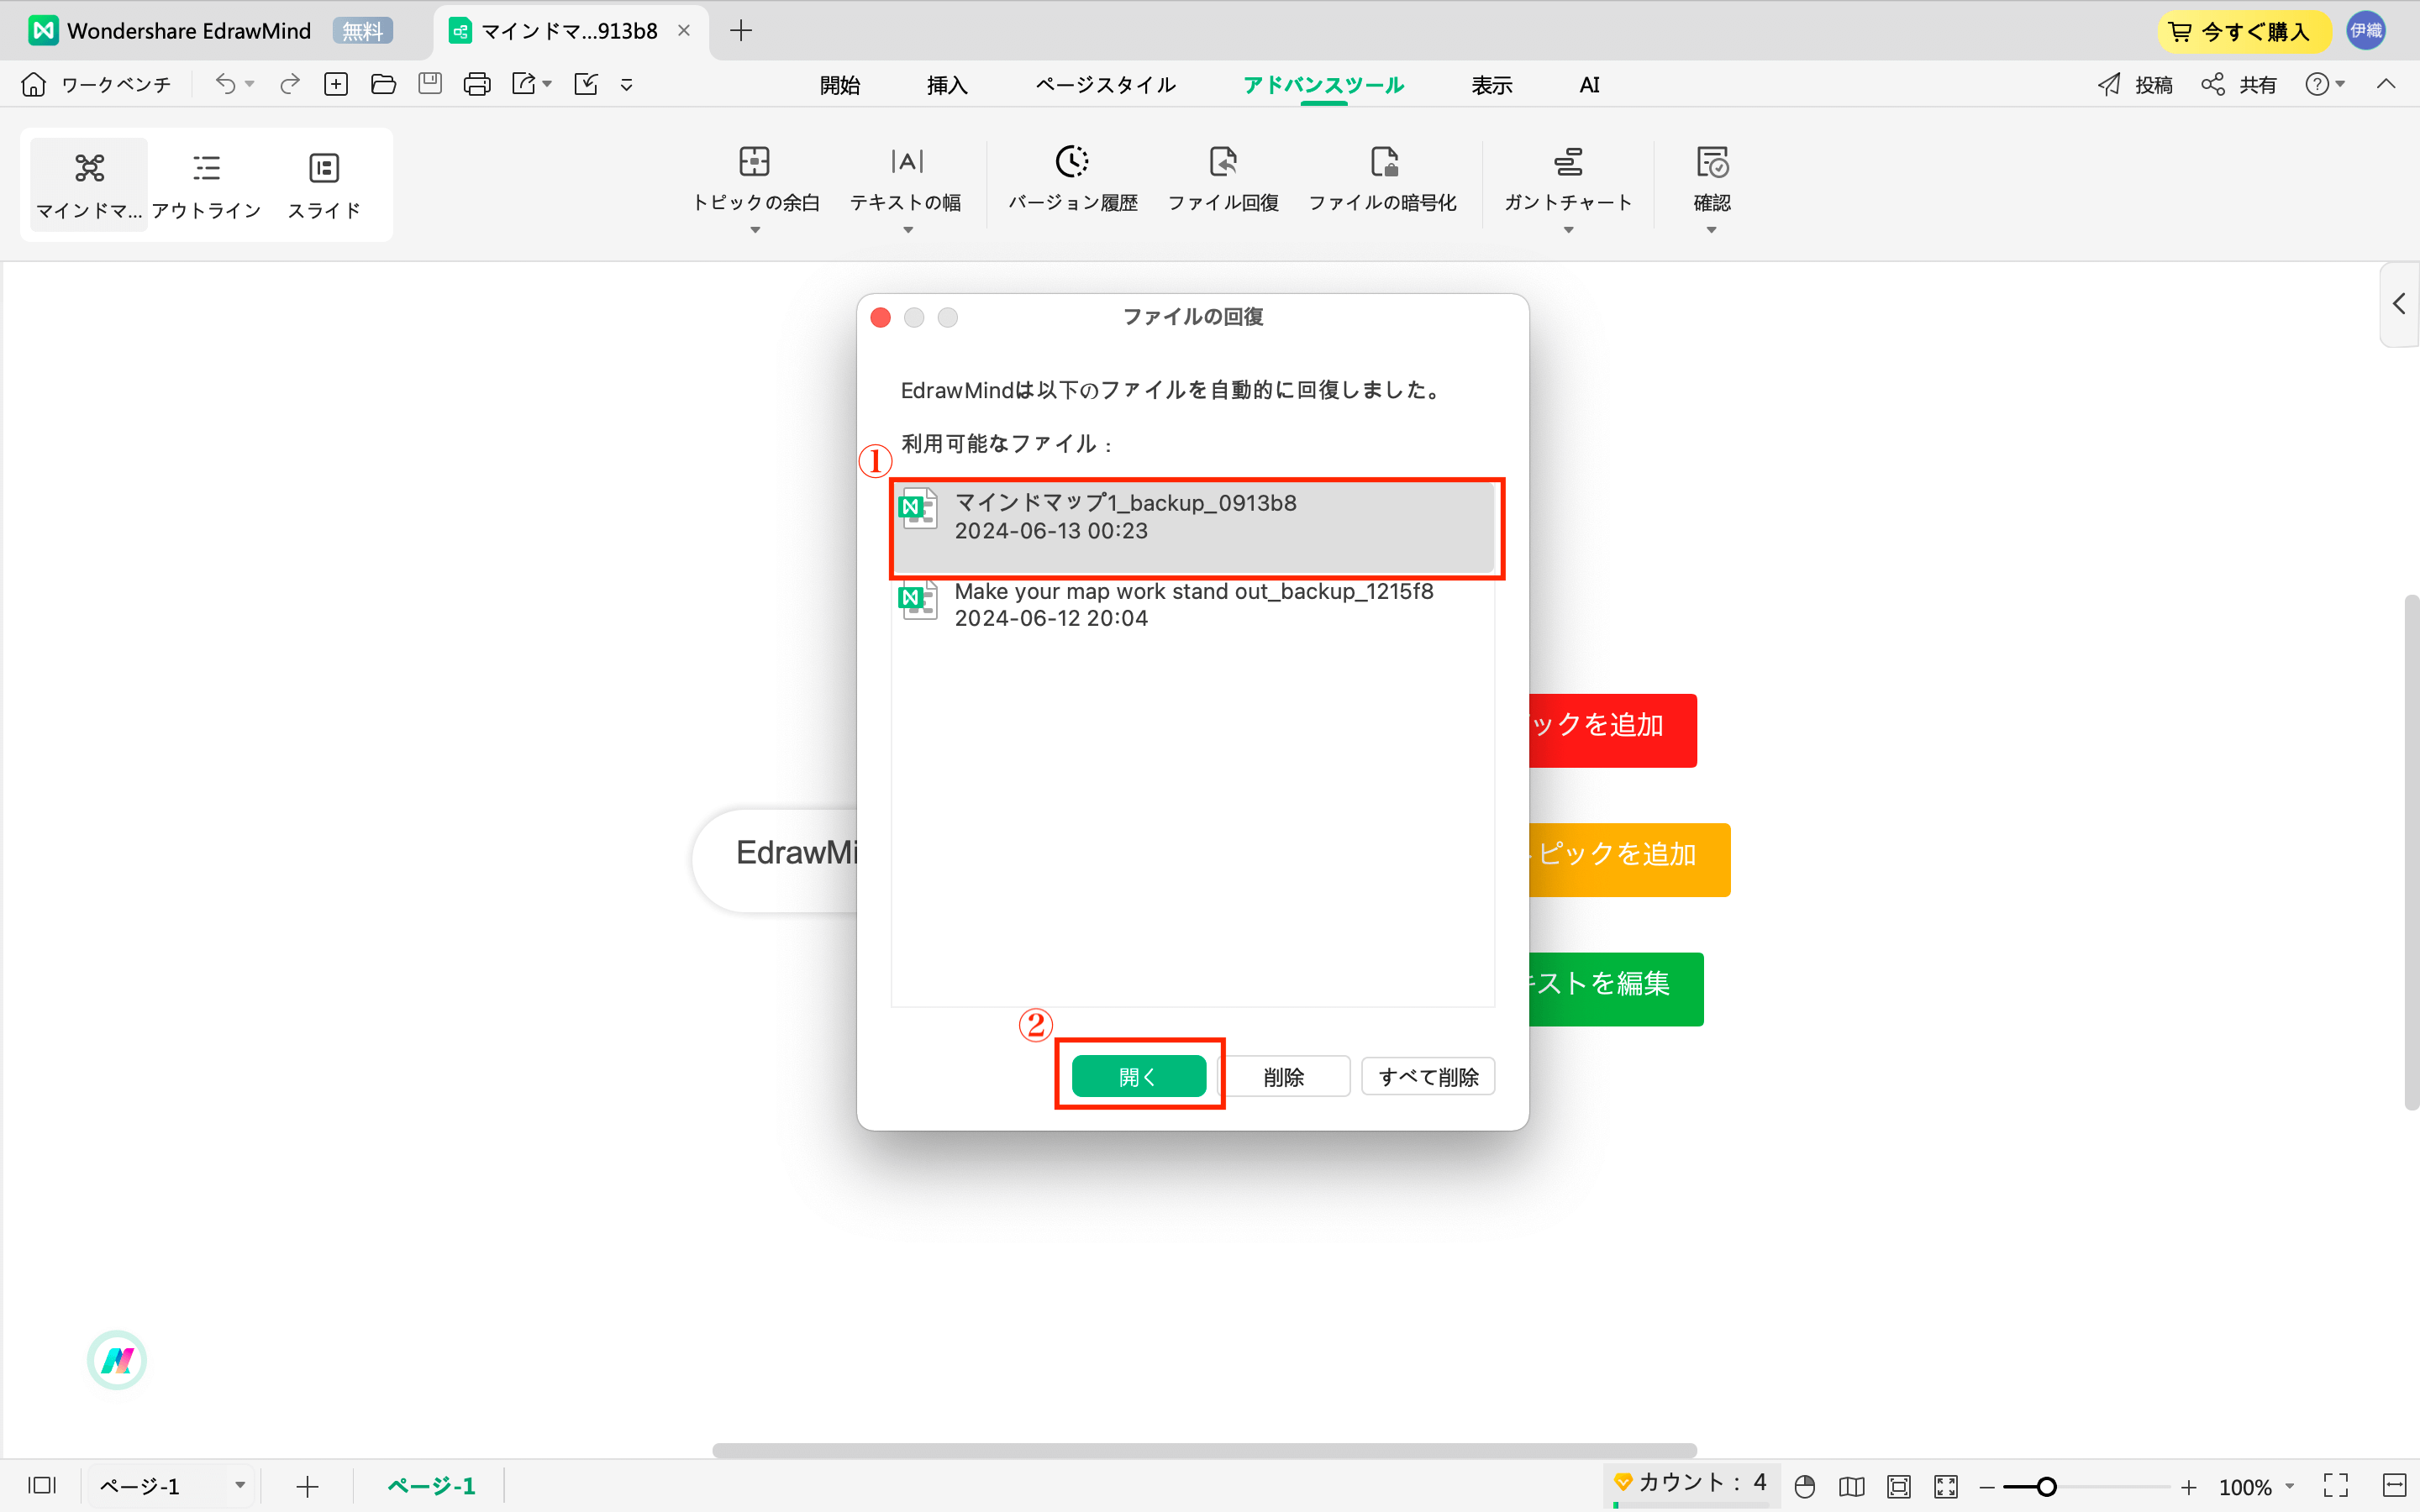 edrawmind file recovery dialogue box